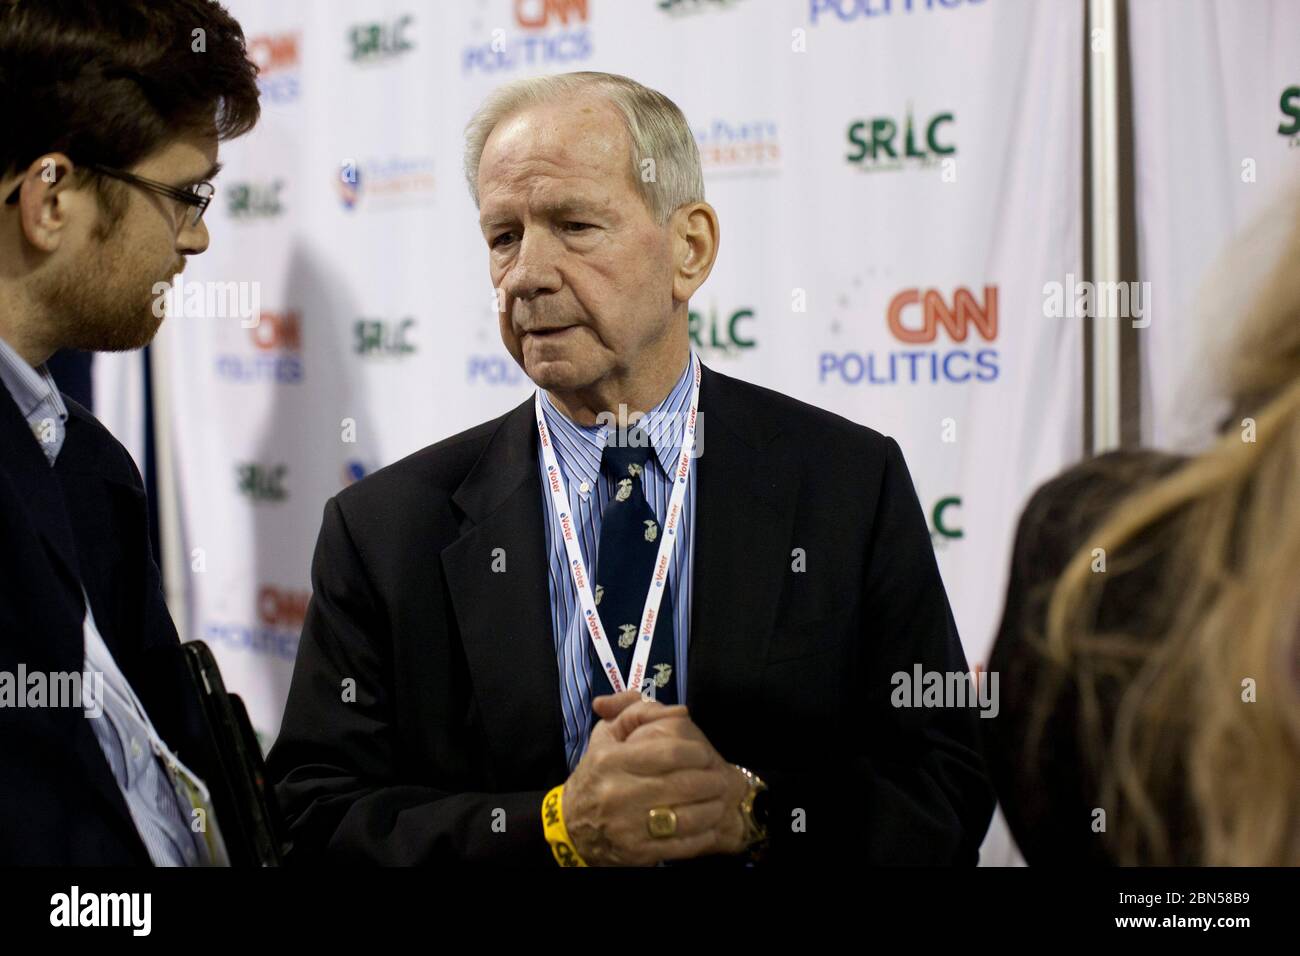 North Charleston South Carolina USA, January 19, 2012: Romney supporter Robert 'Bud' McFarland, a consultant for Republican presidential hopeful Mitt Romney, talks to the press in the spin room after the four remaining Republican presidential candidates squared off   at the CNN Debate. ©Bob Daemmrich Stock Photo